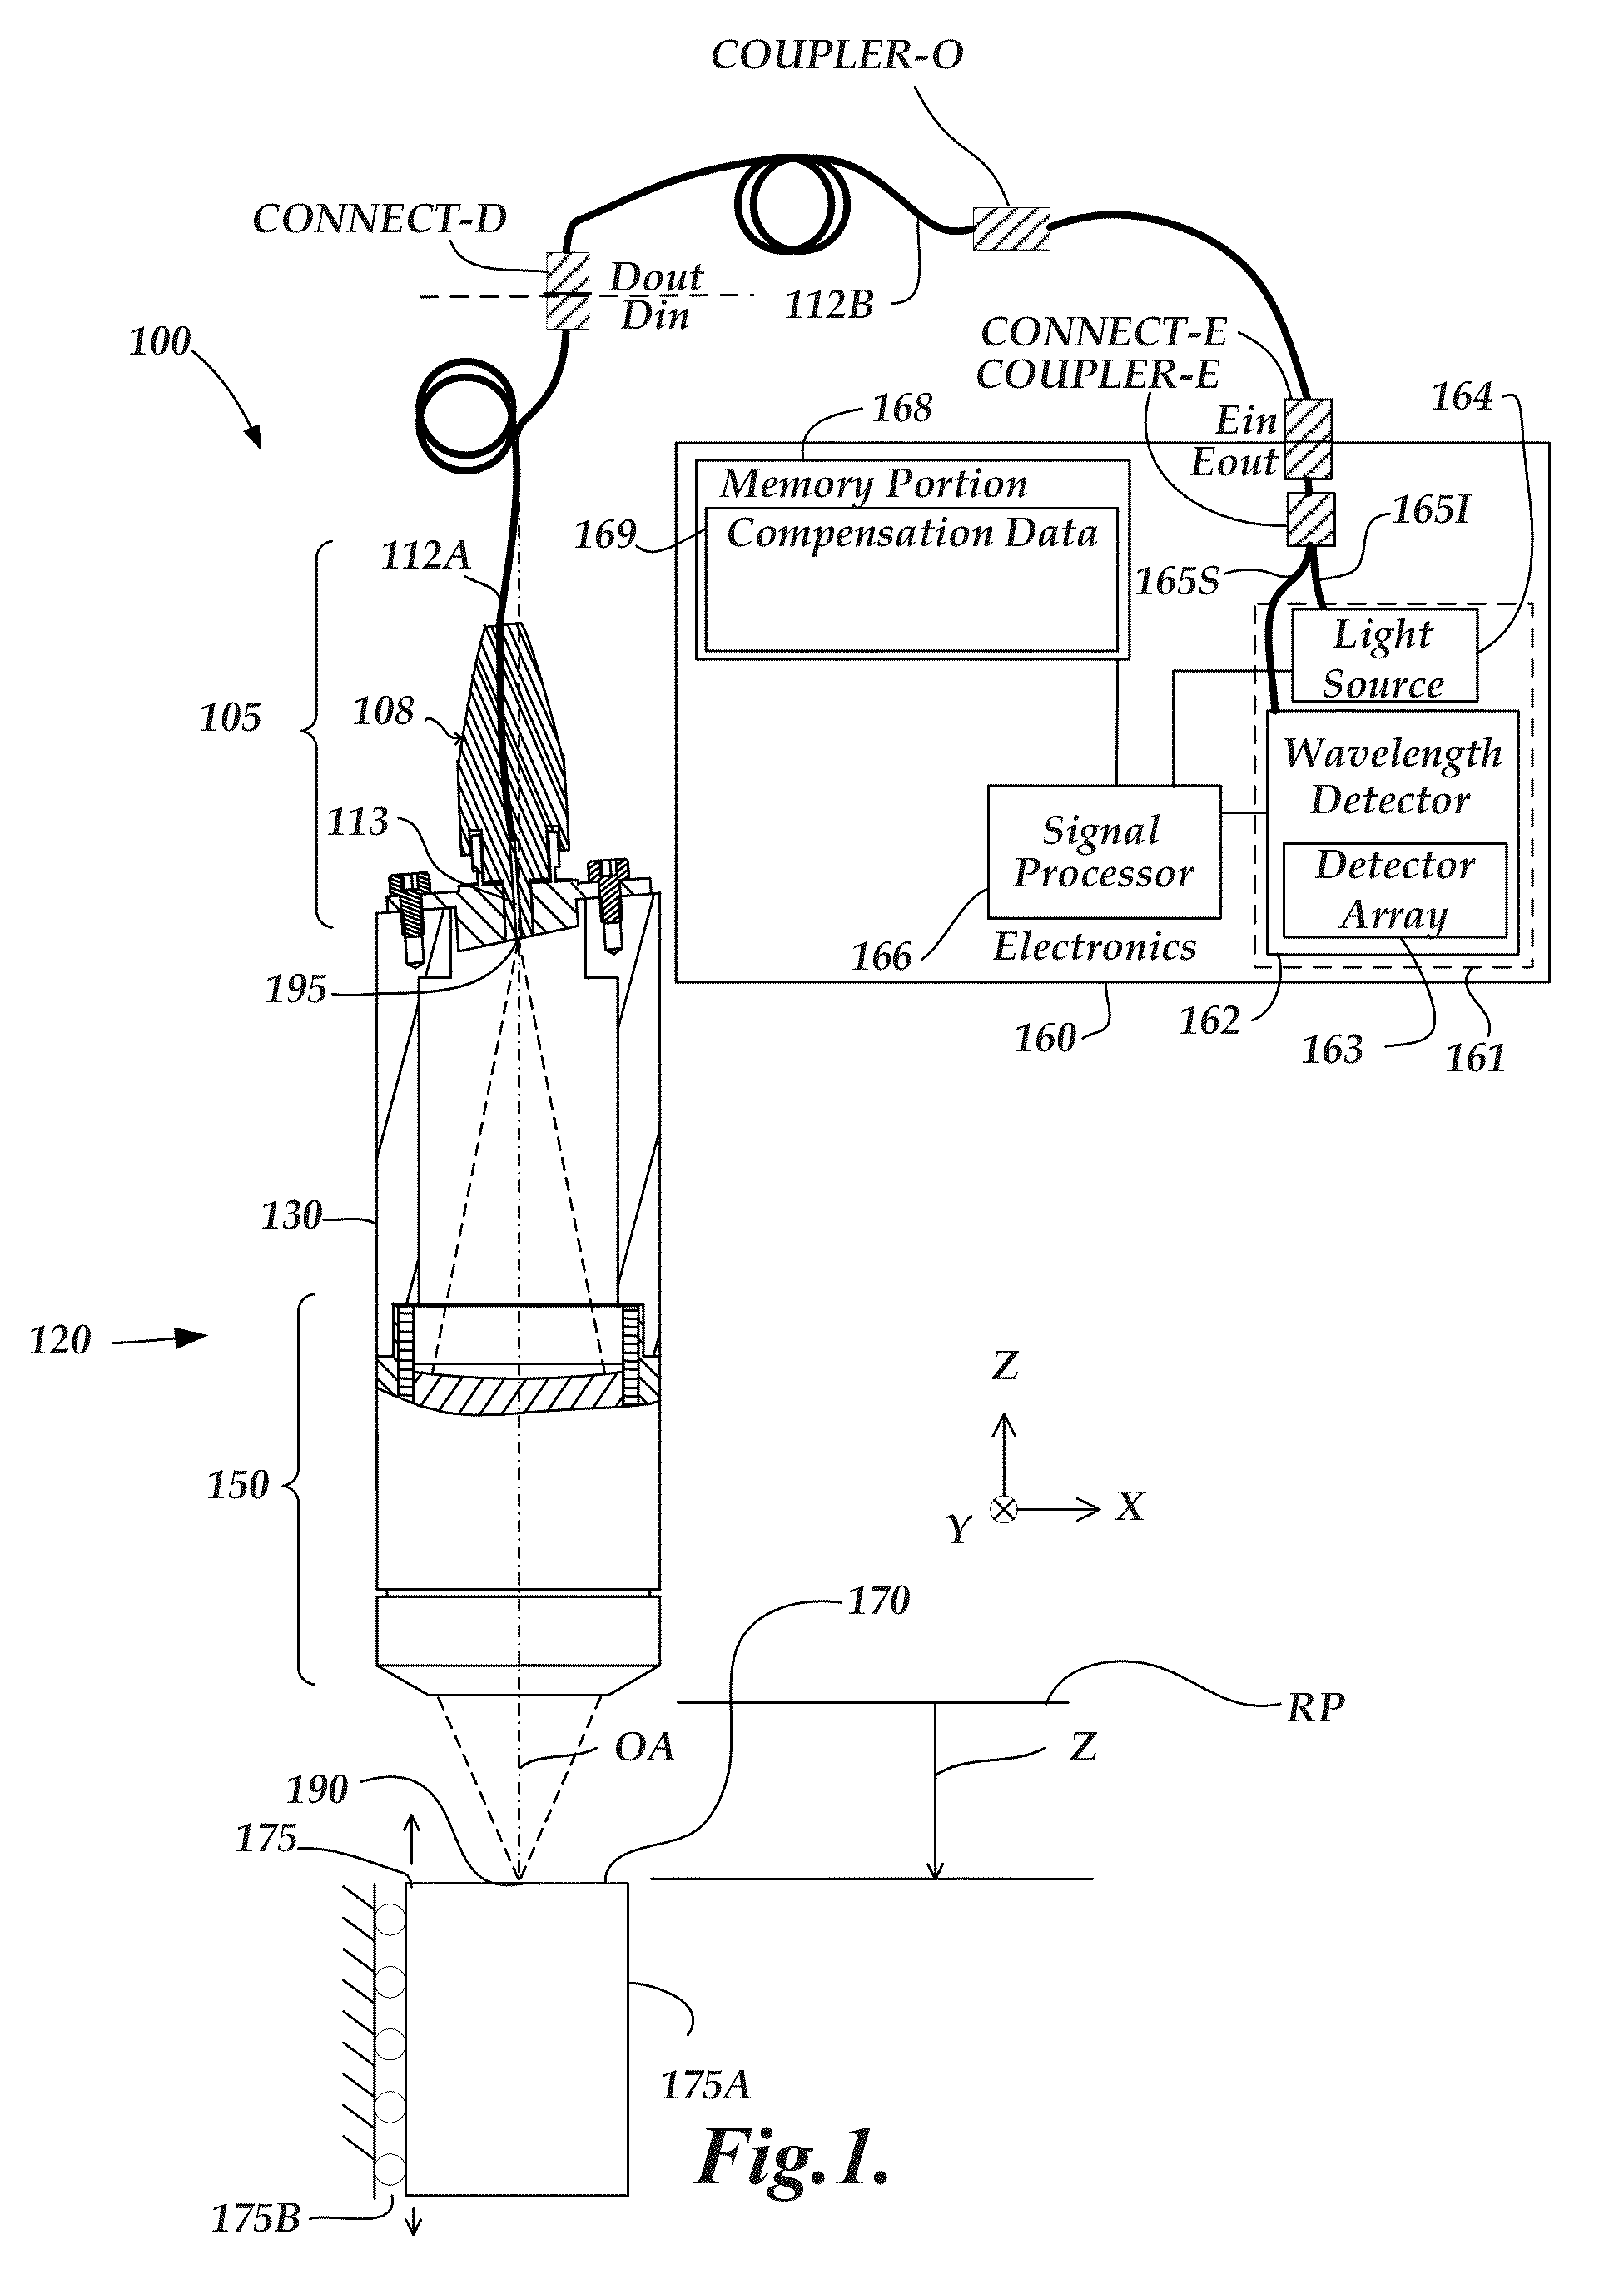 Method for identifying abnormal spectral profiles measured by a chromatic confocal range sensor